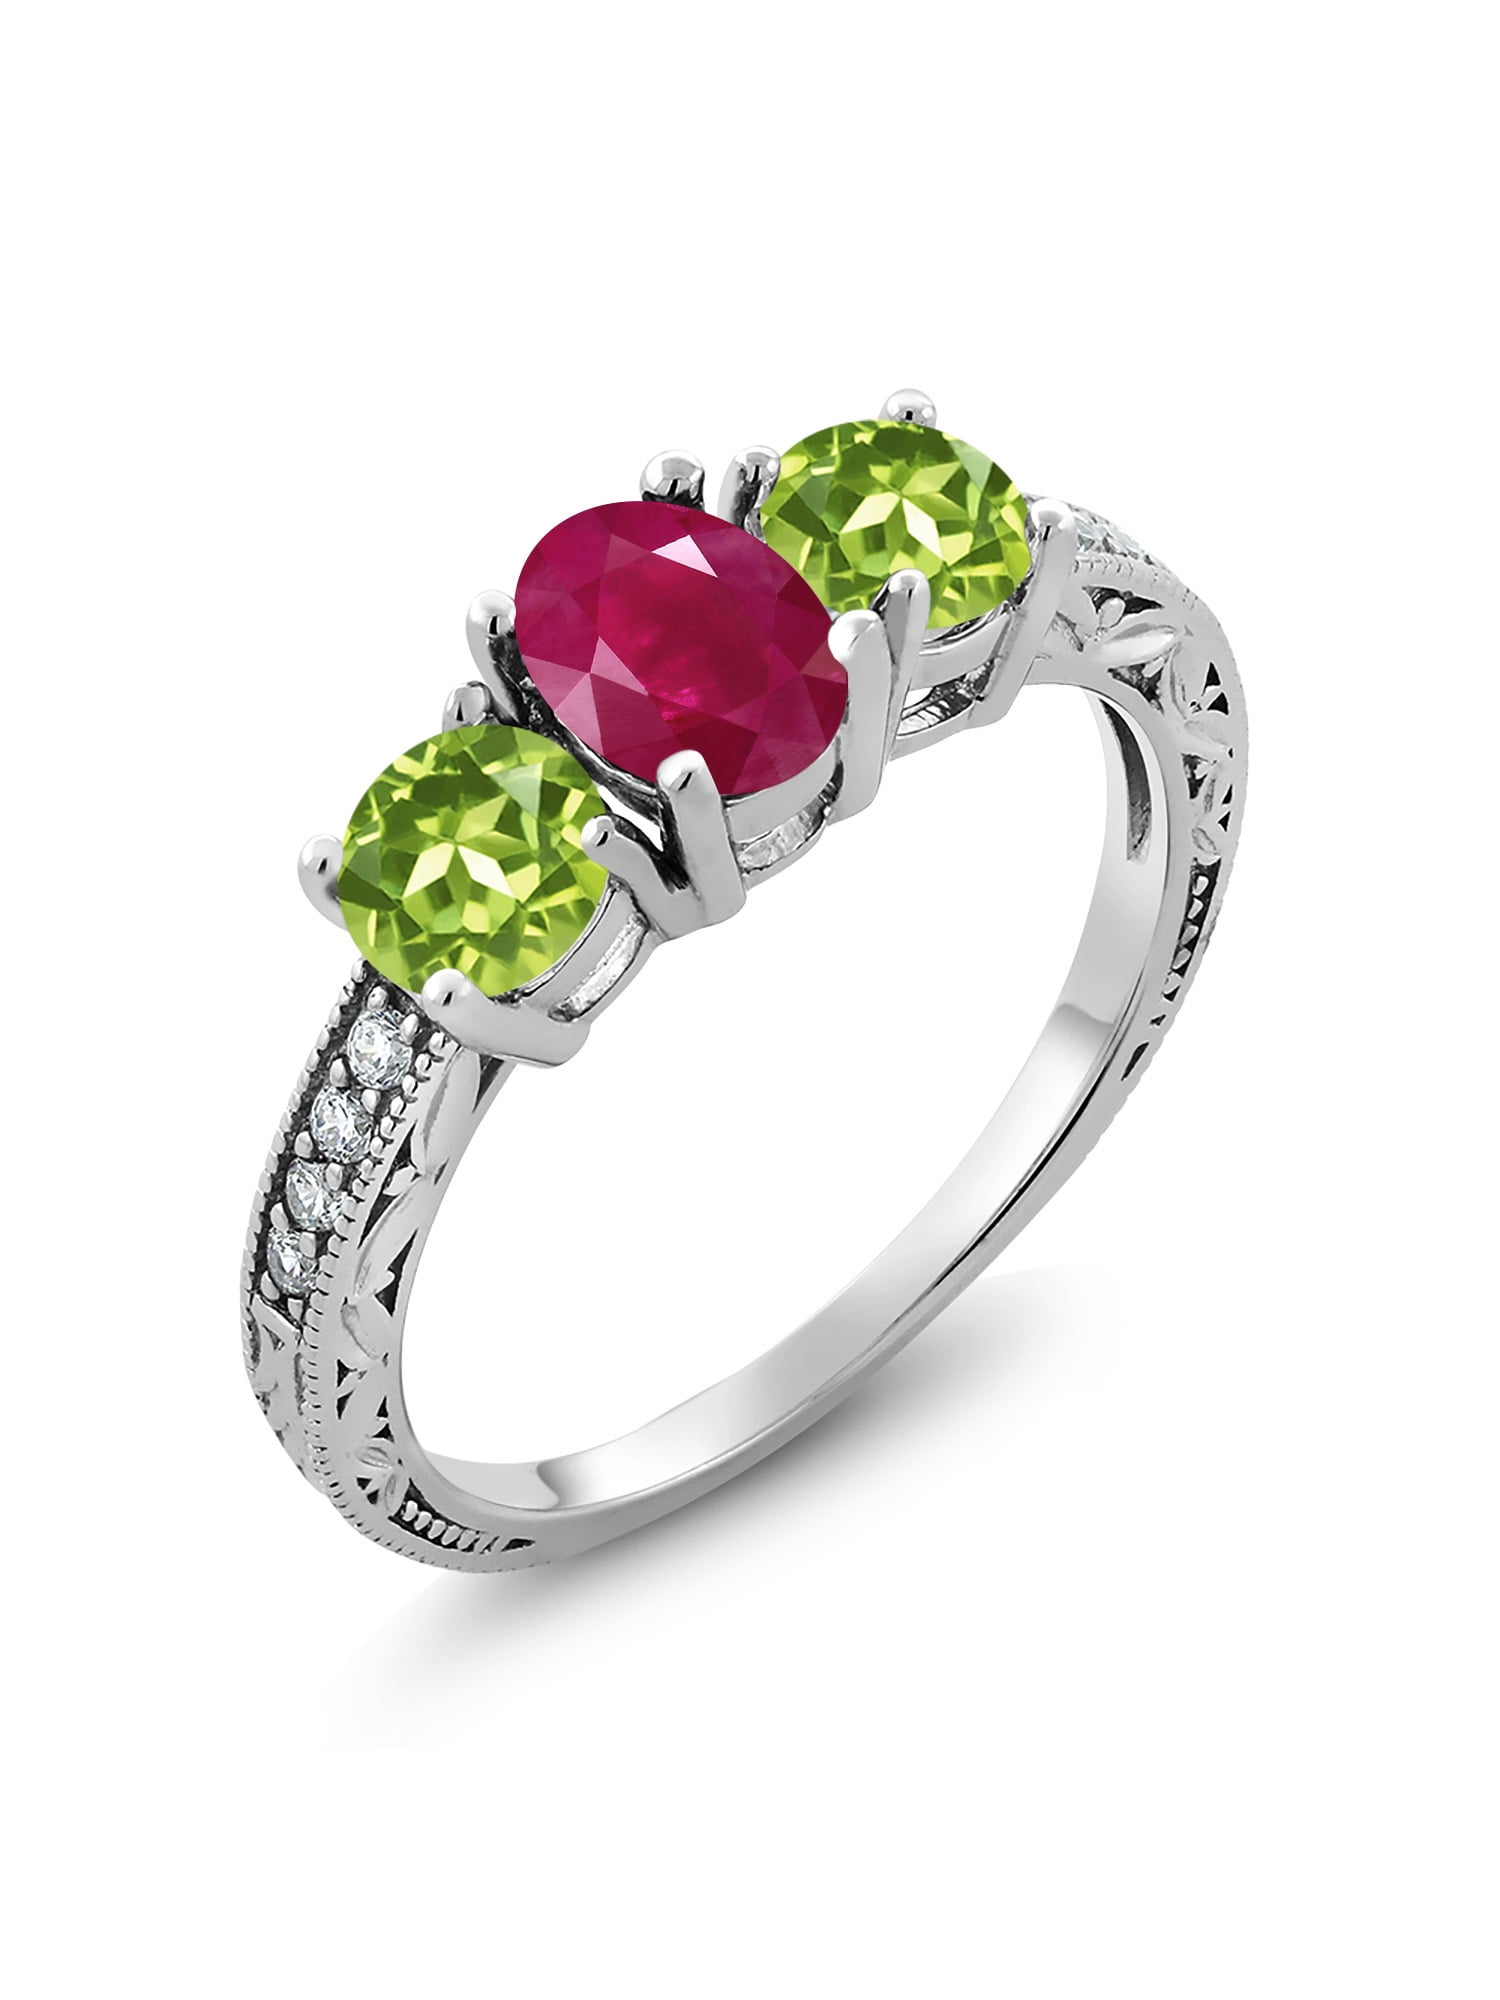 Gem Stone King 2.27 Ct Oval Red Ruby Green Peridot 925 Sterling Silver Ring